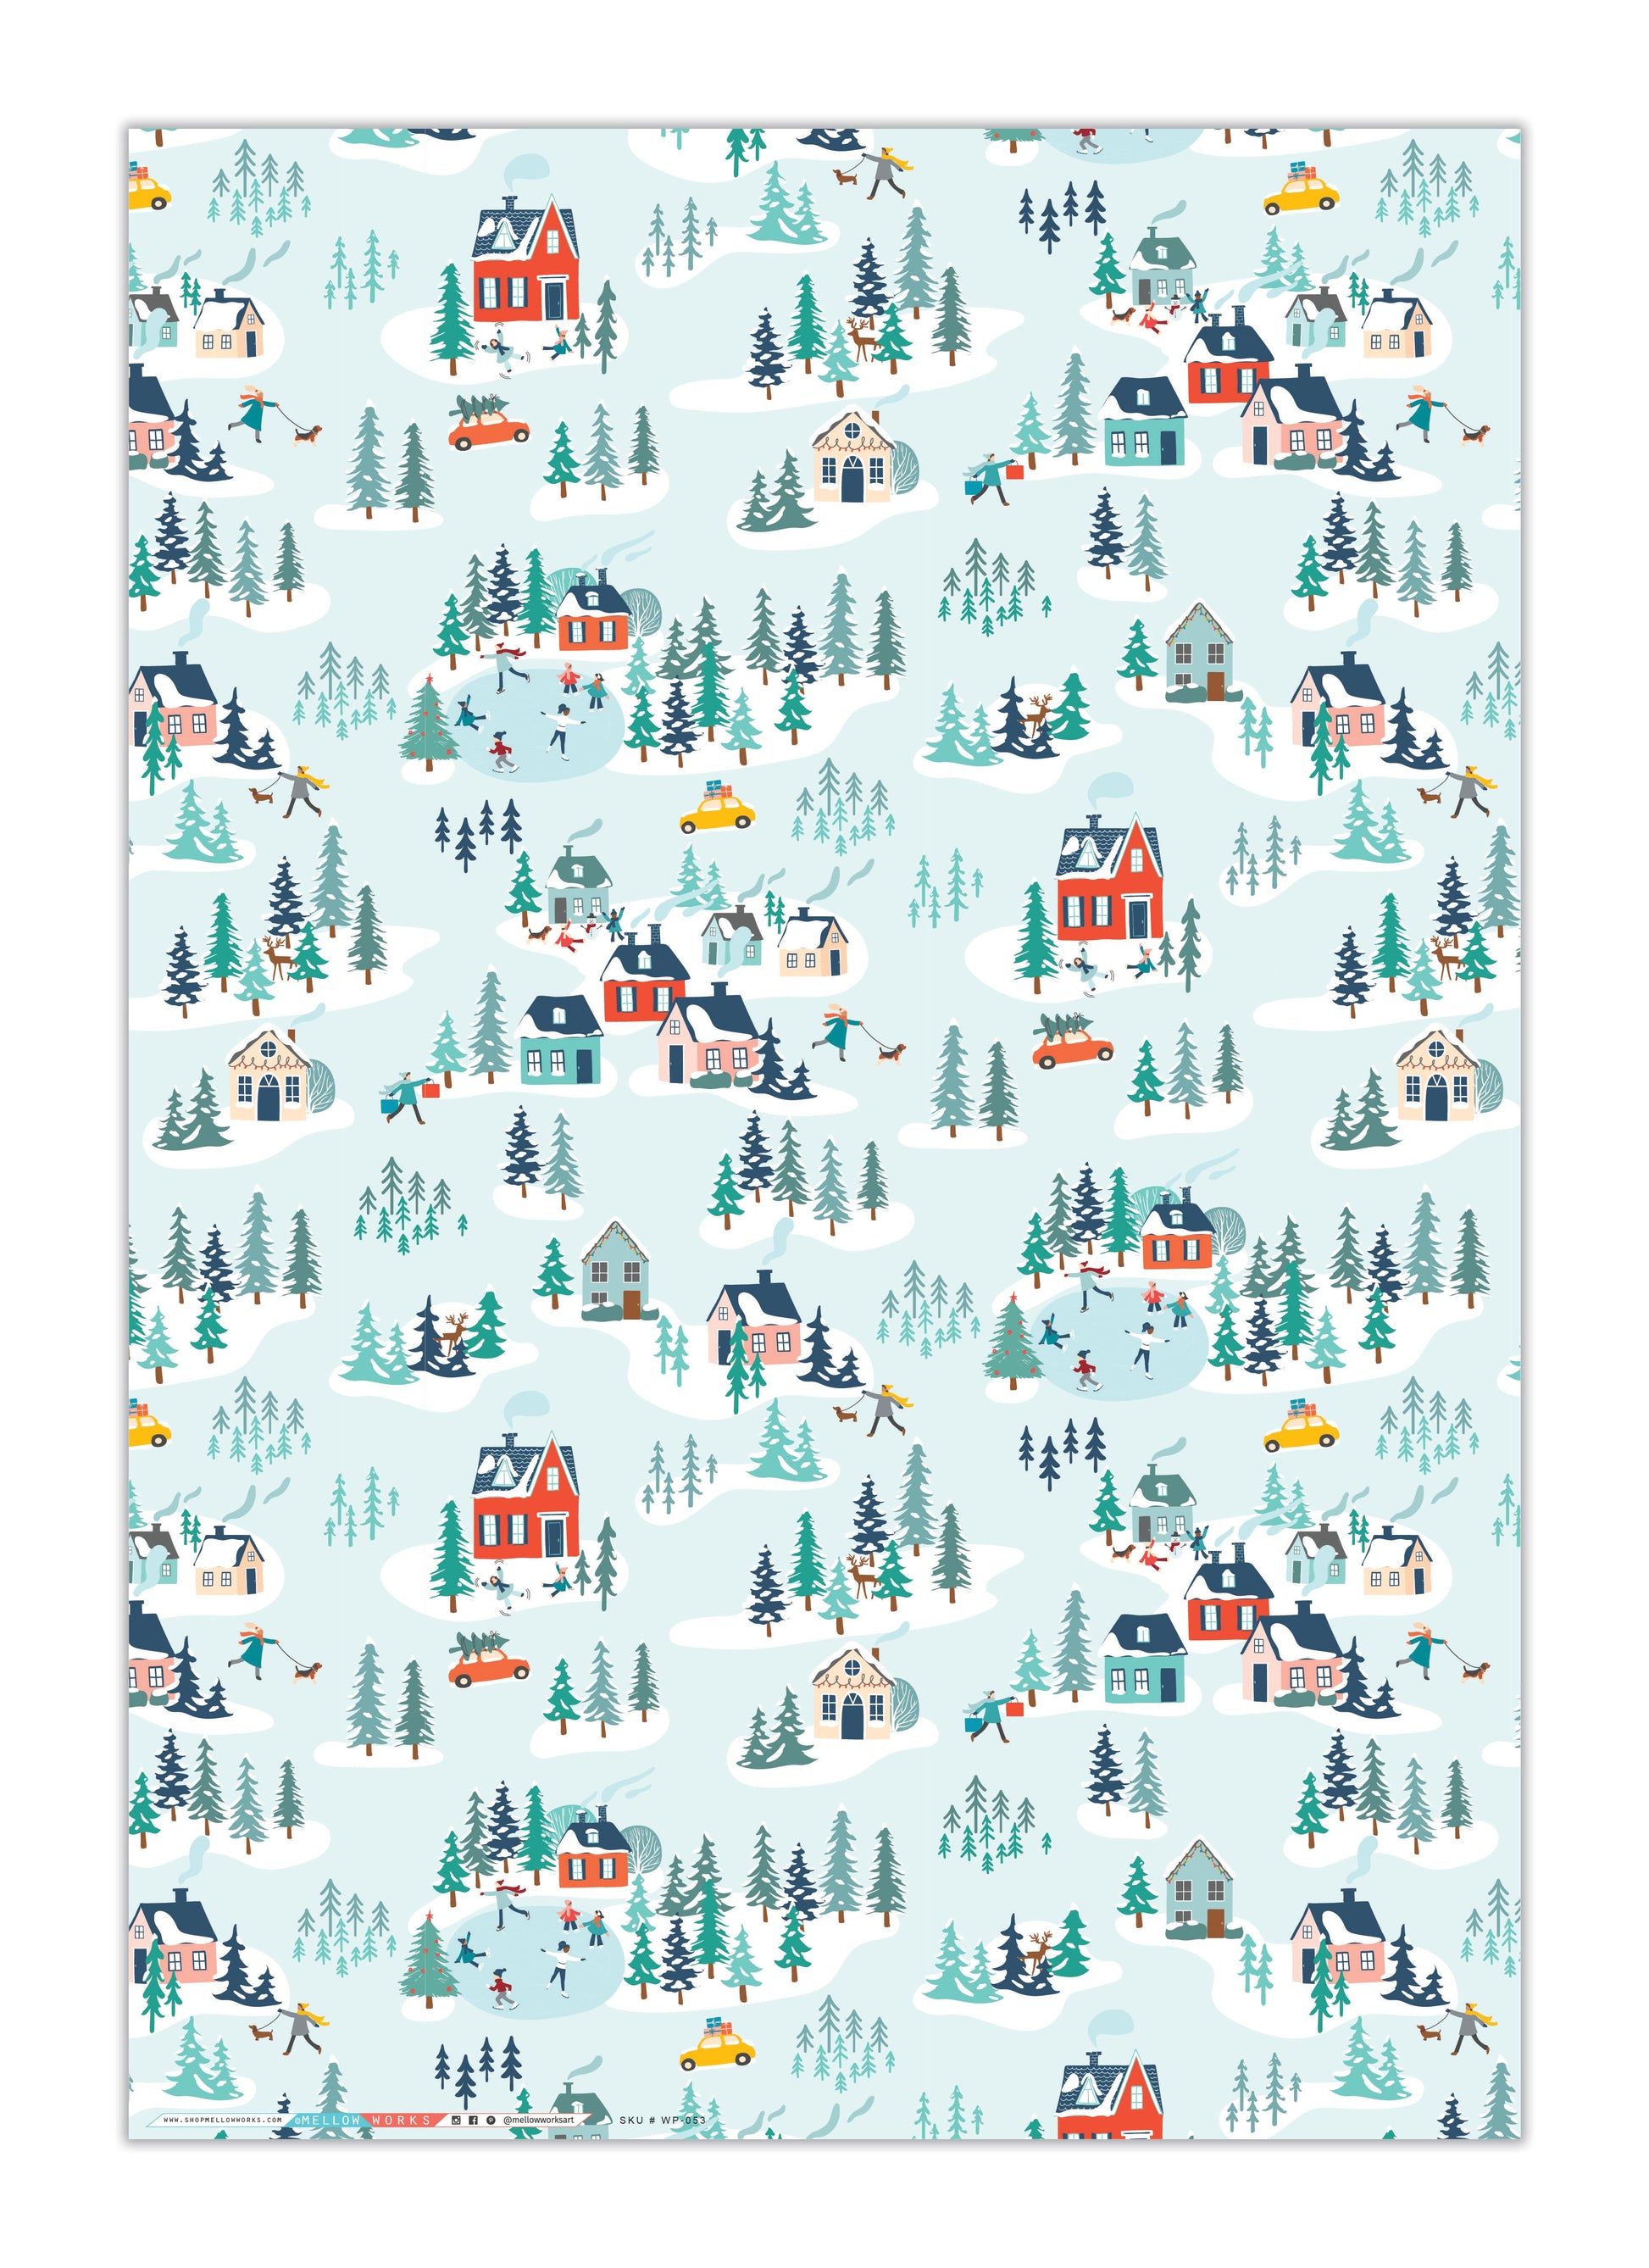 Kids Wrapping Paper, Childrens Wrapping Paper Sheet, Illustrated Gift Wrap, Recyclable  Wrapping Paper, Kids Wrapping Paper. 